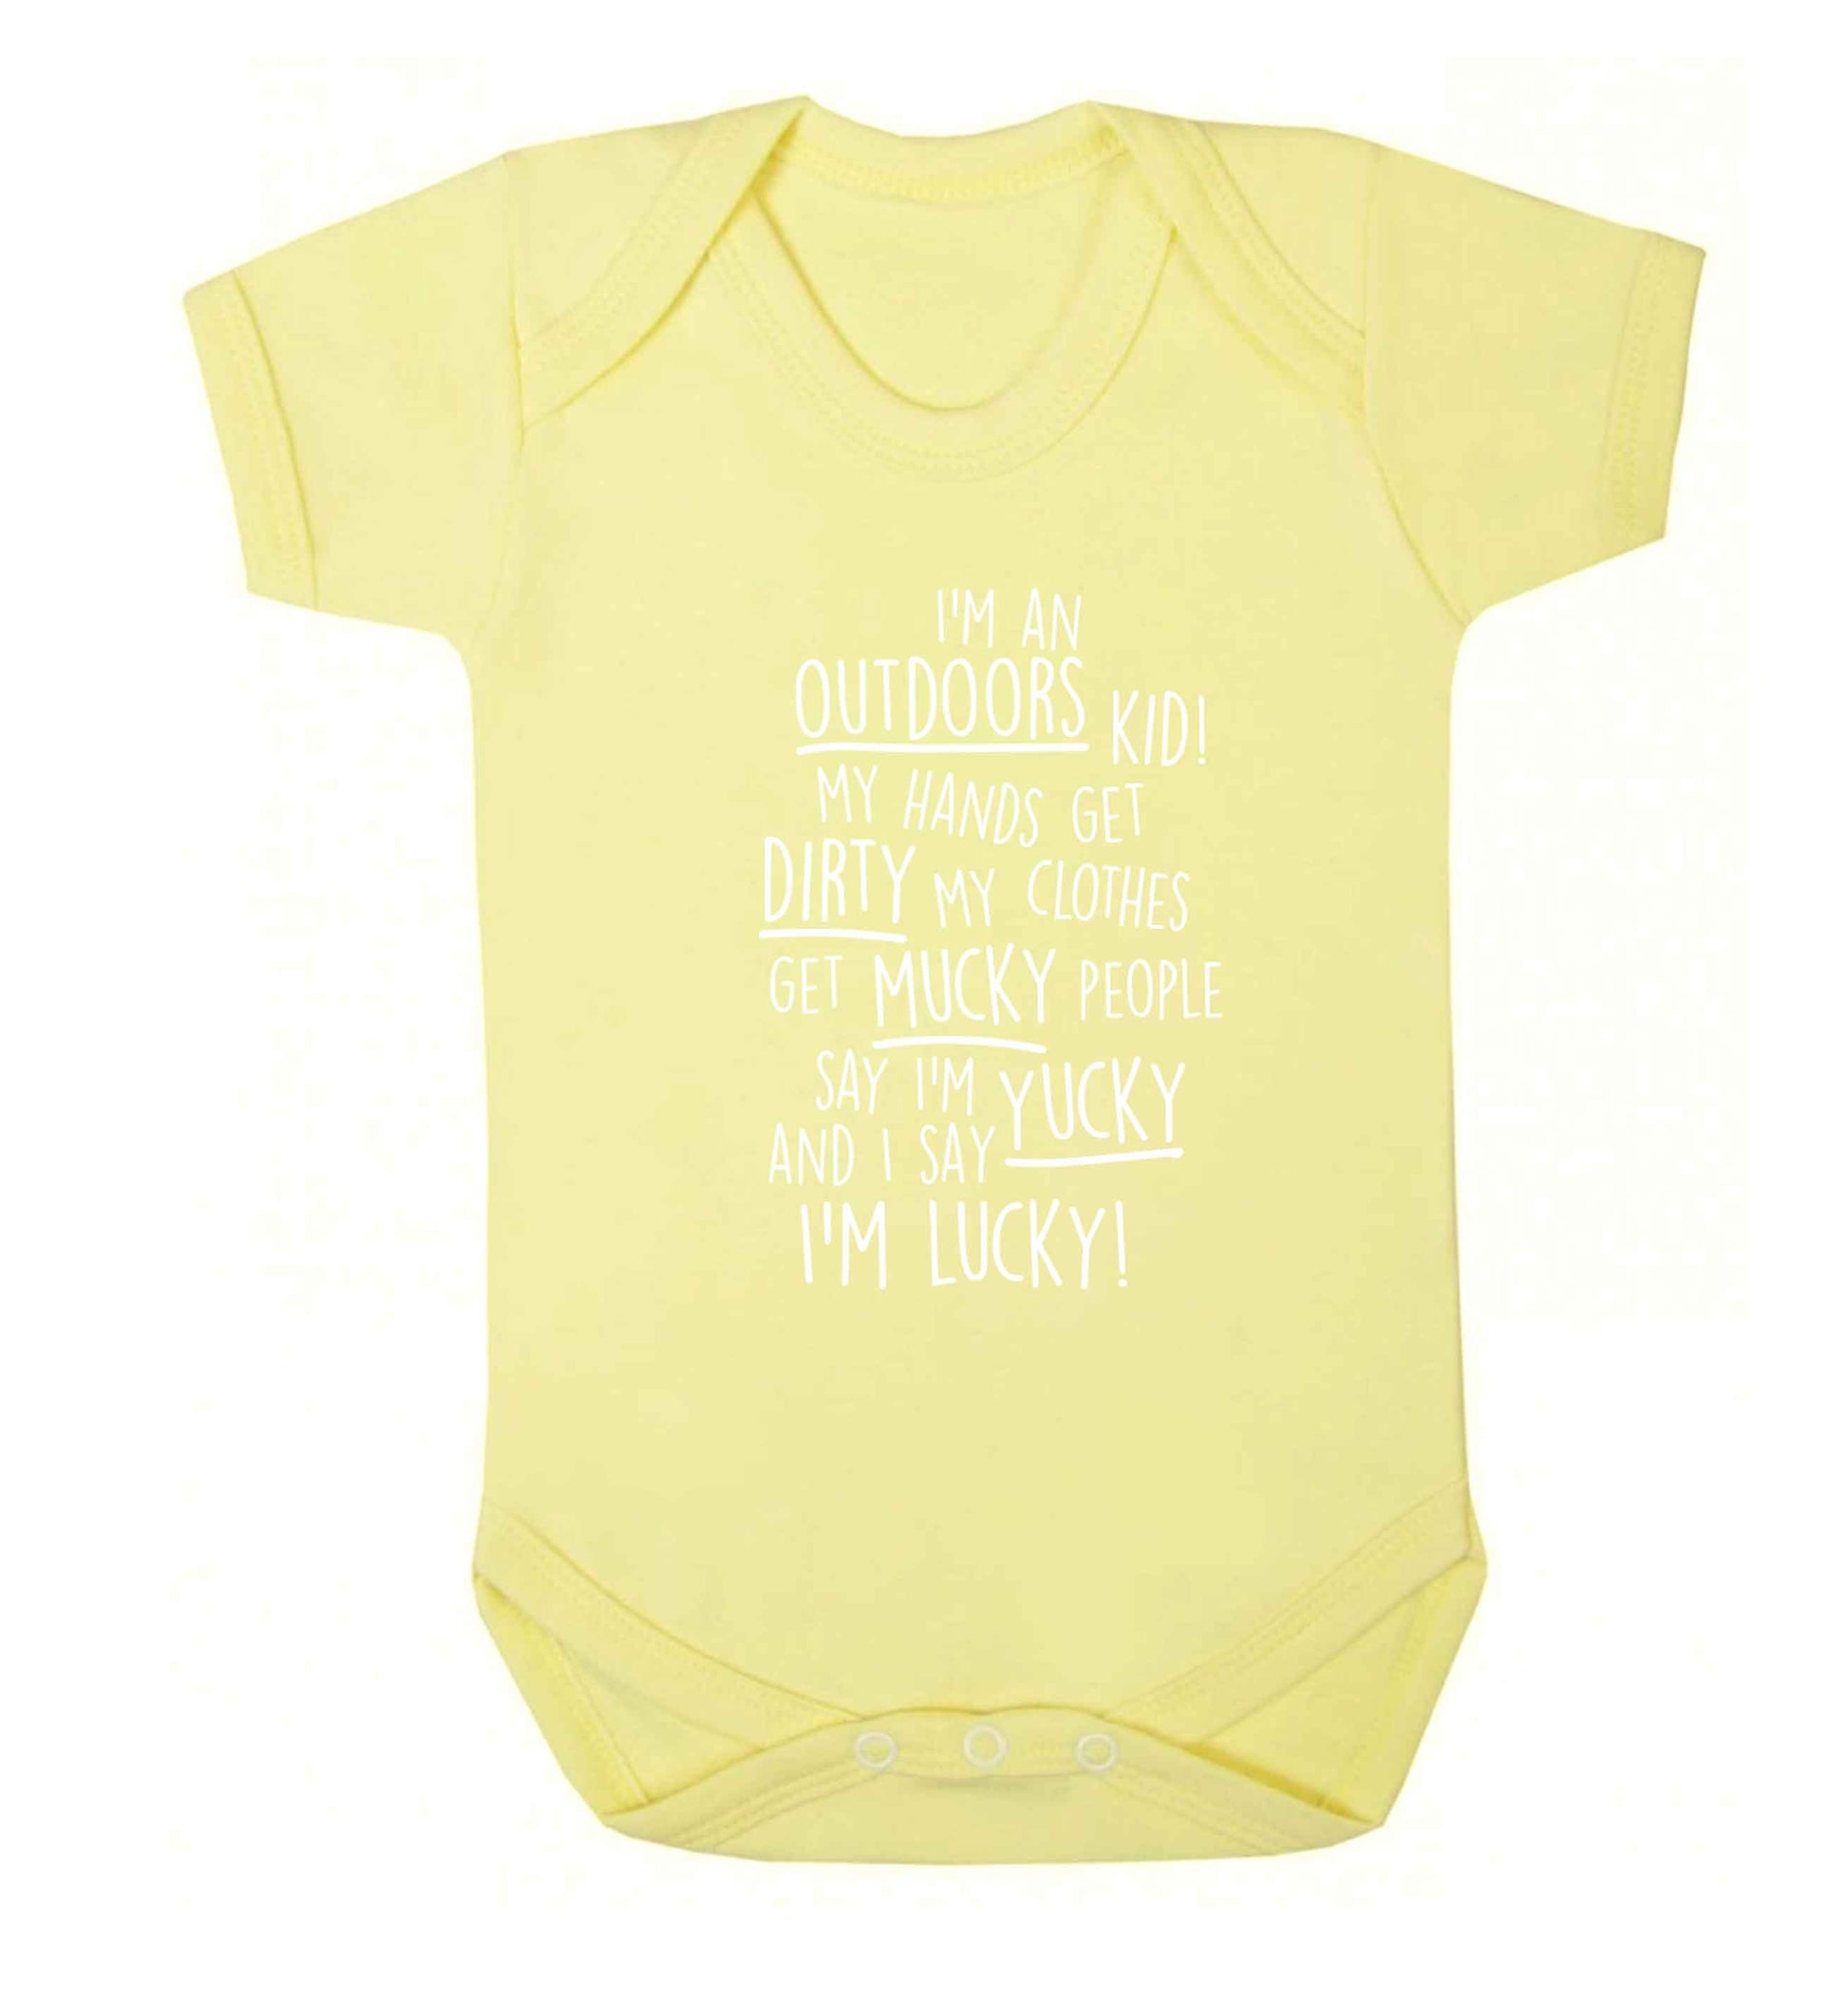 I'm an outdoors kid poem Baby Vest pale yellow 18-24 months